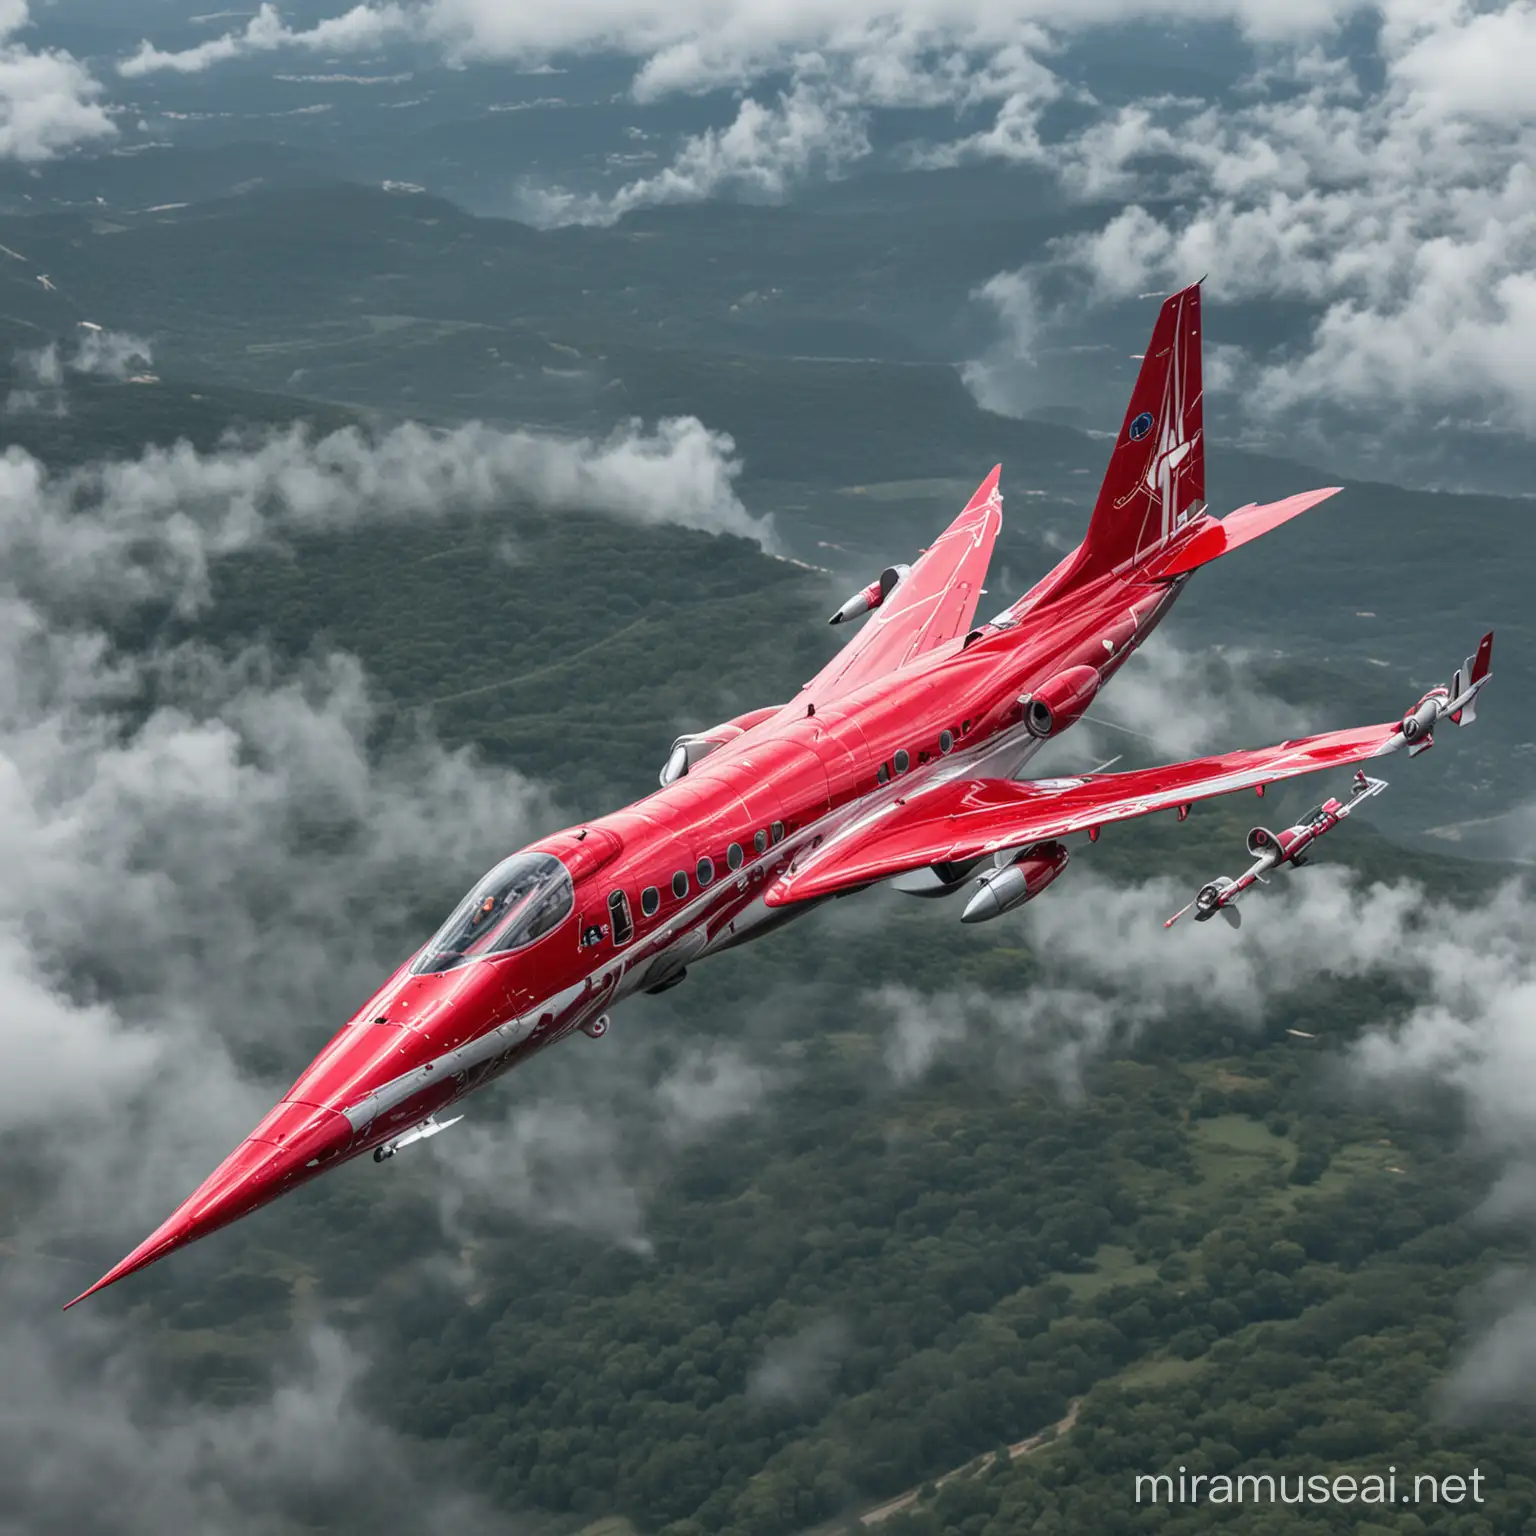 Scarlett Witch Style Airplane Flying Through Surreal Skies